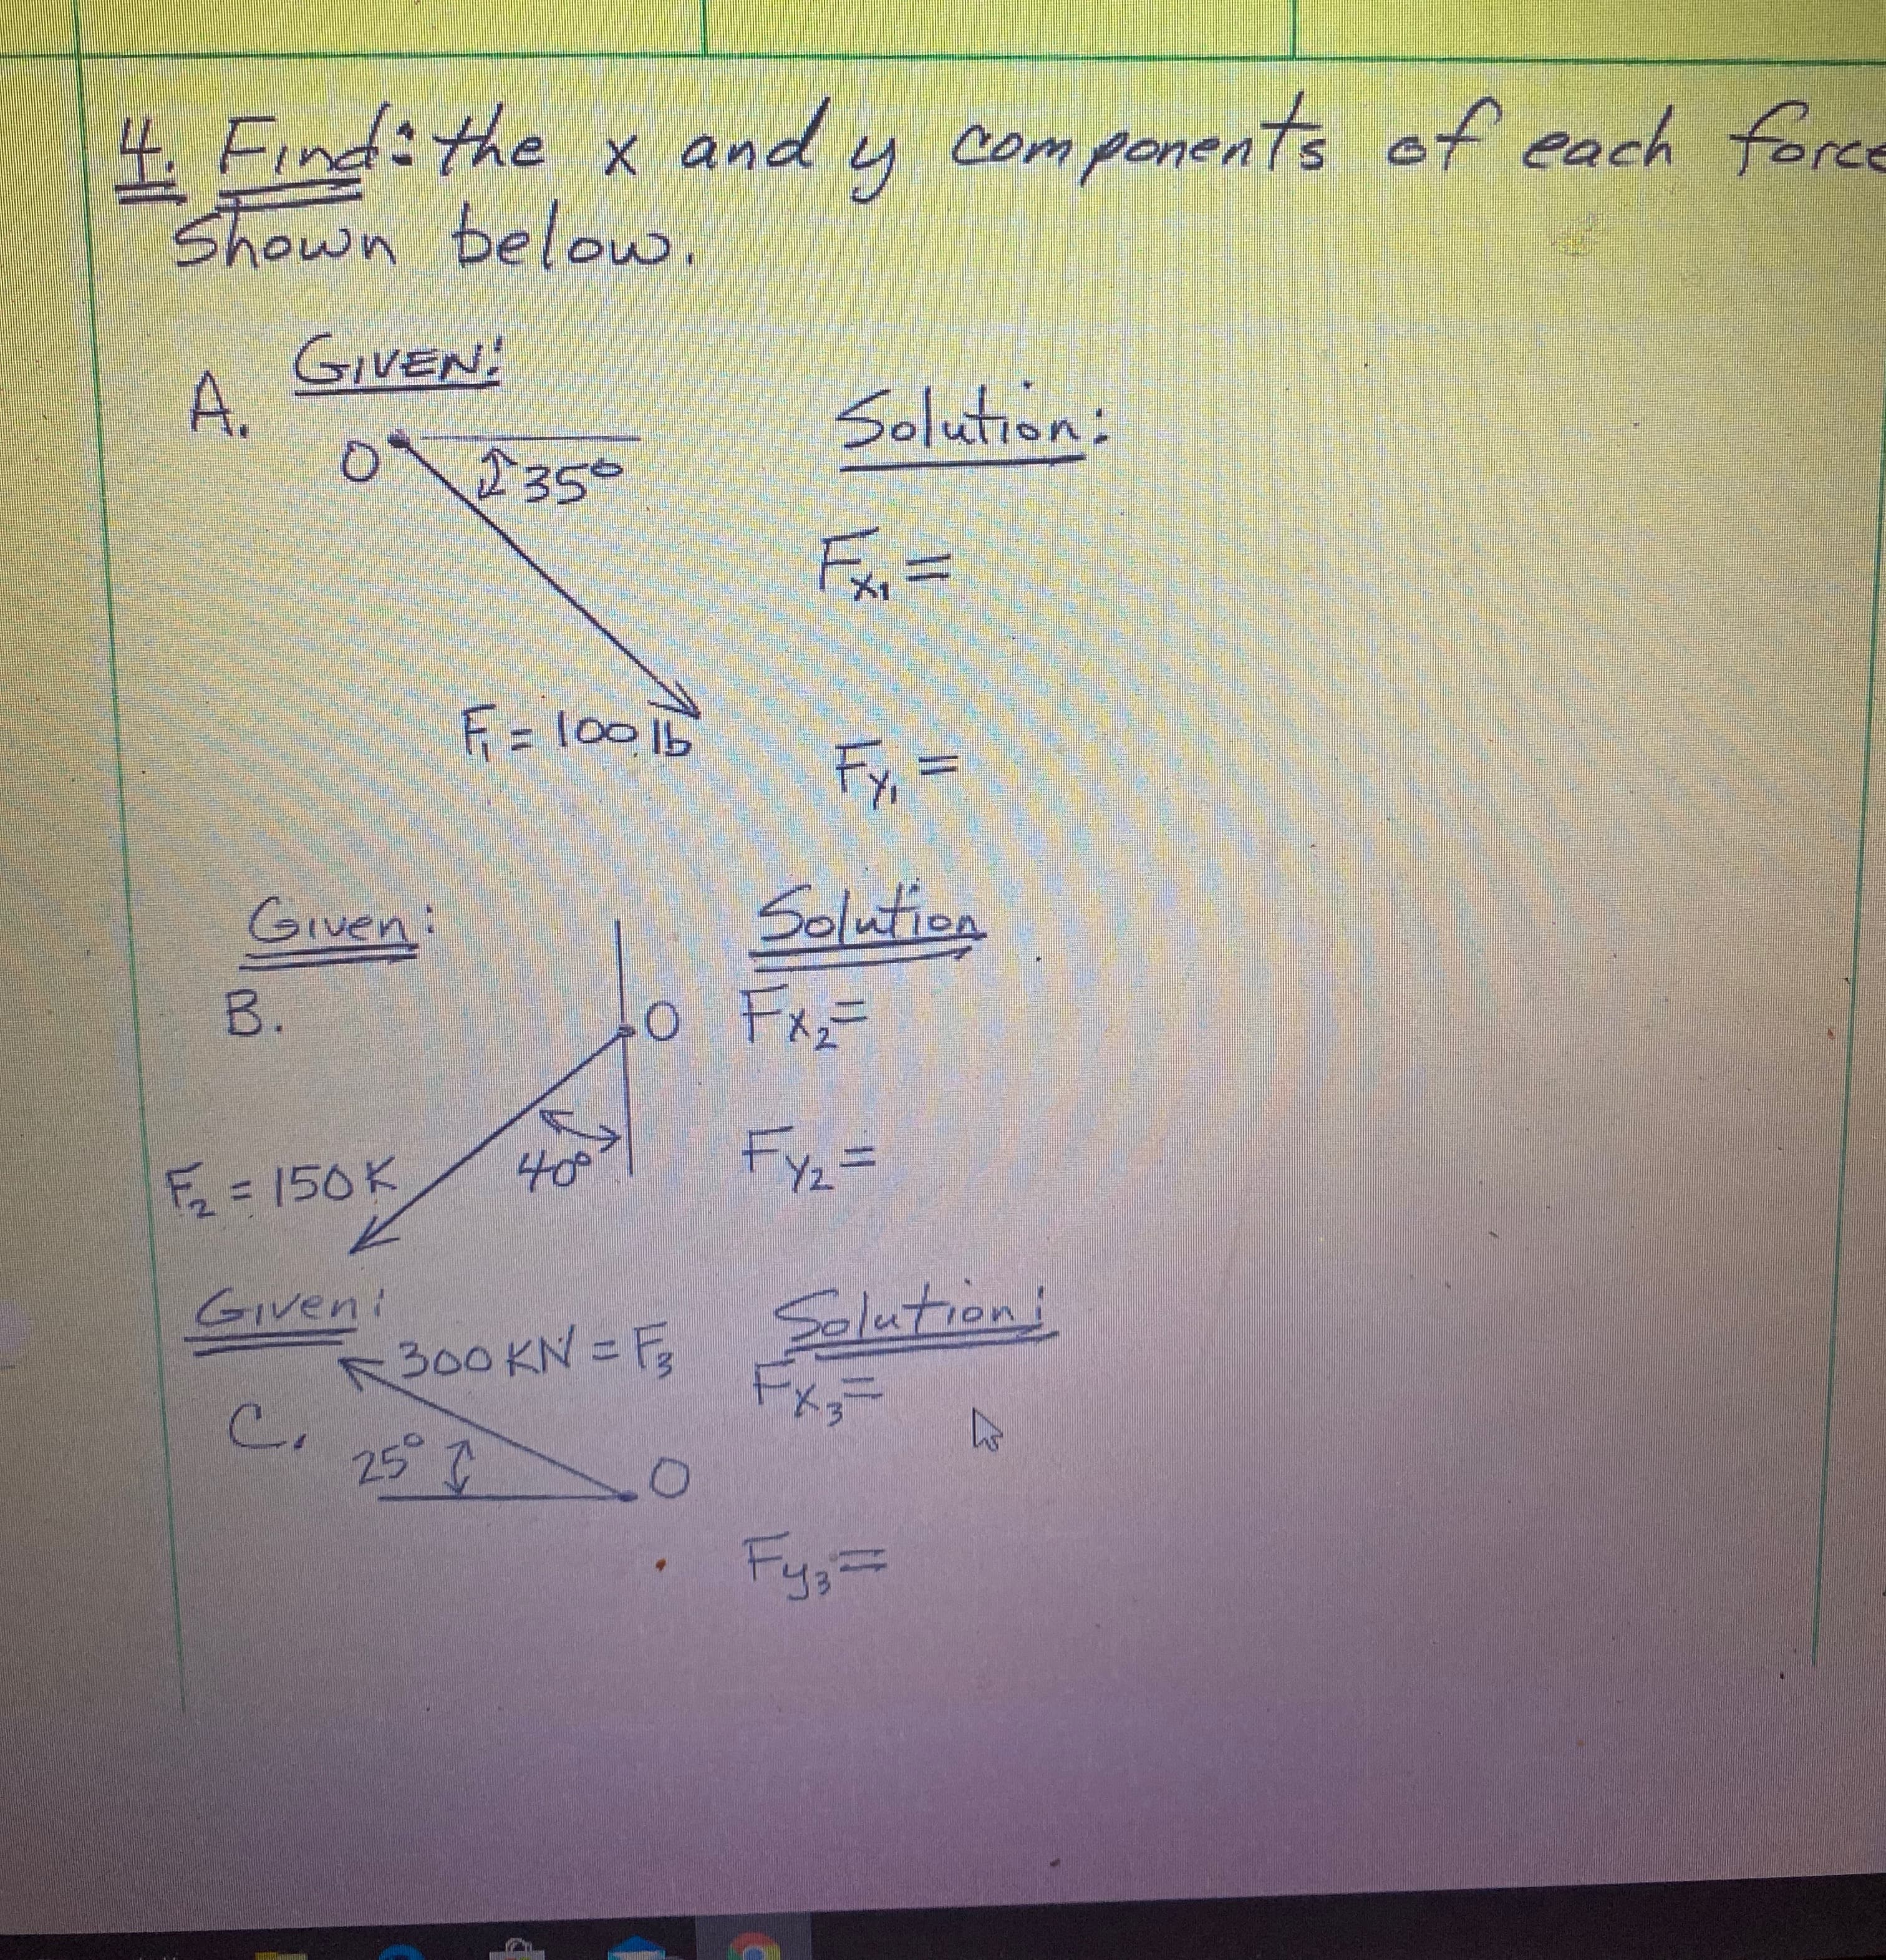 4. Find: the x and y
Shown below.
components cf each force
prce
